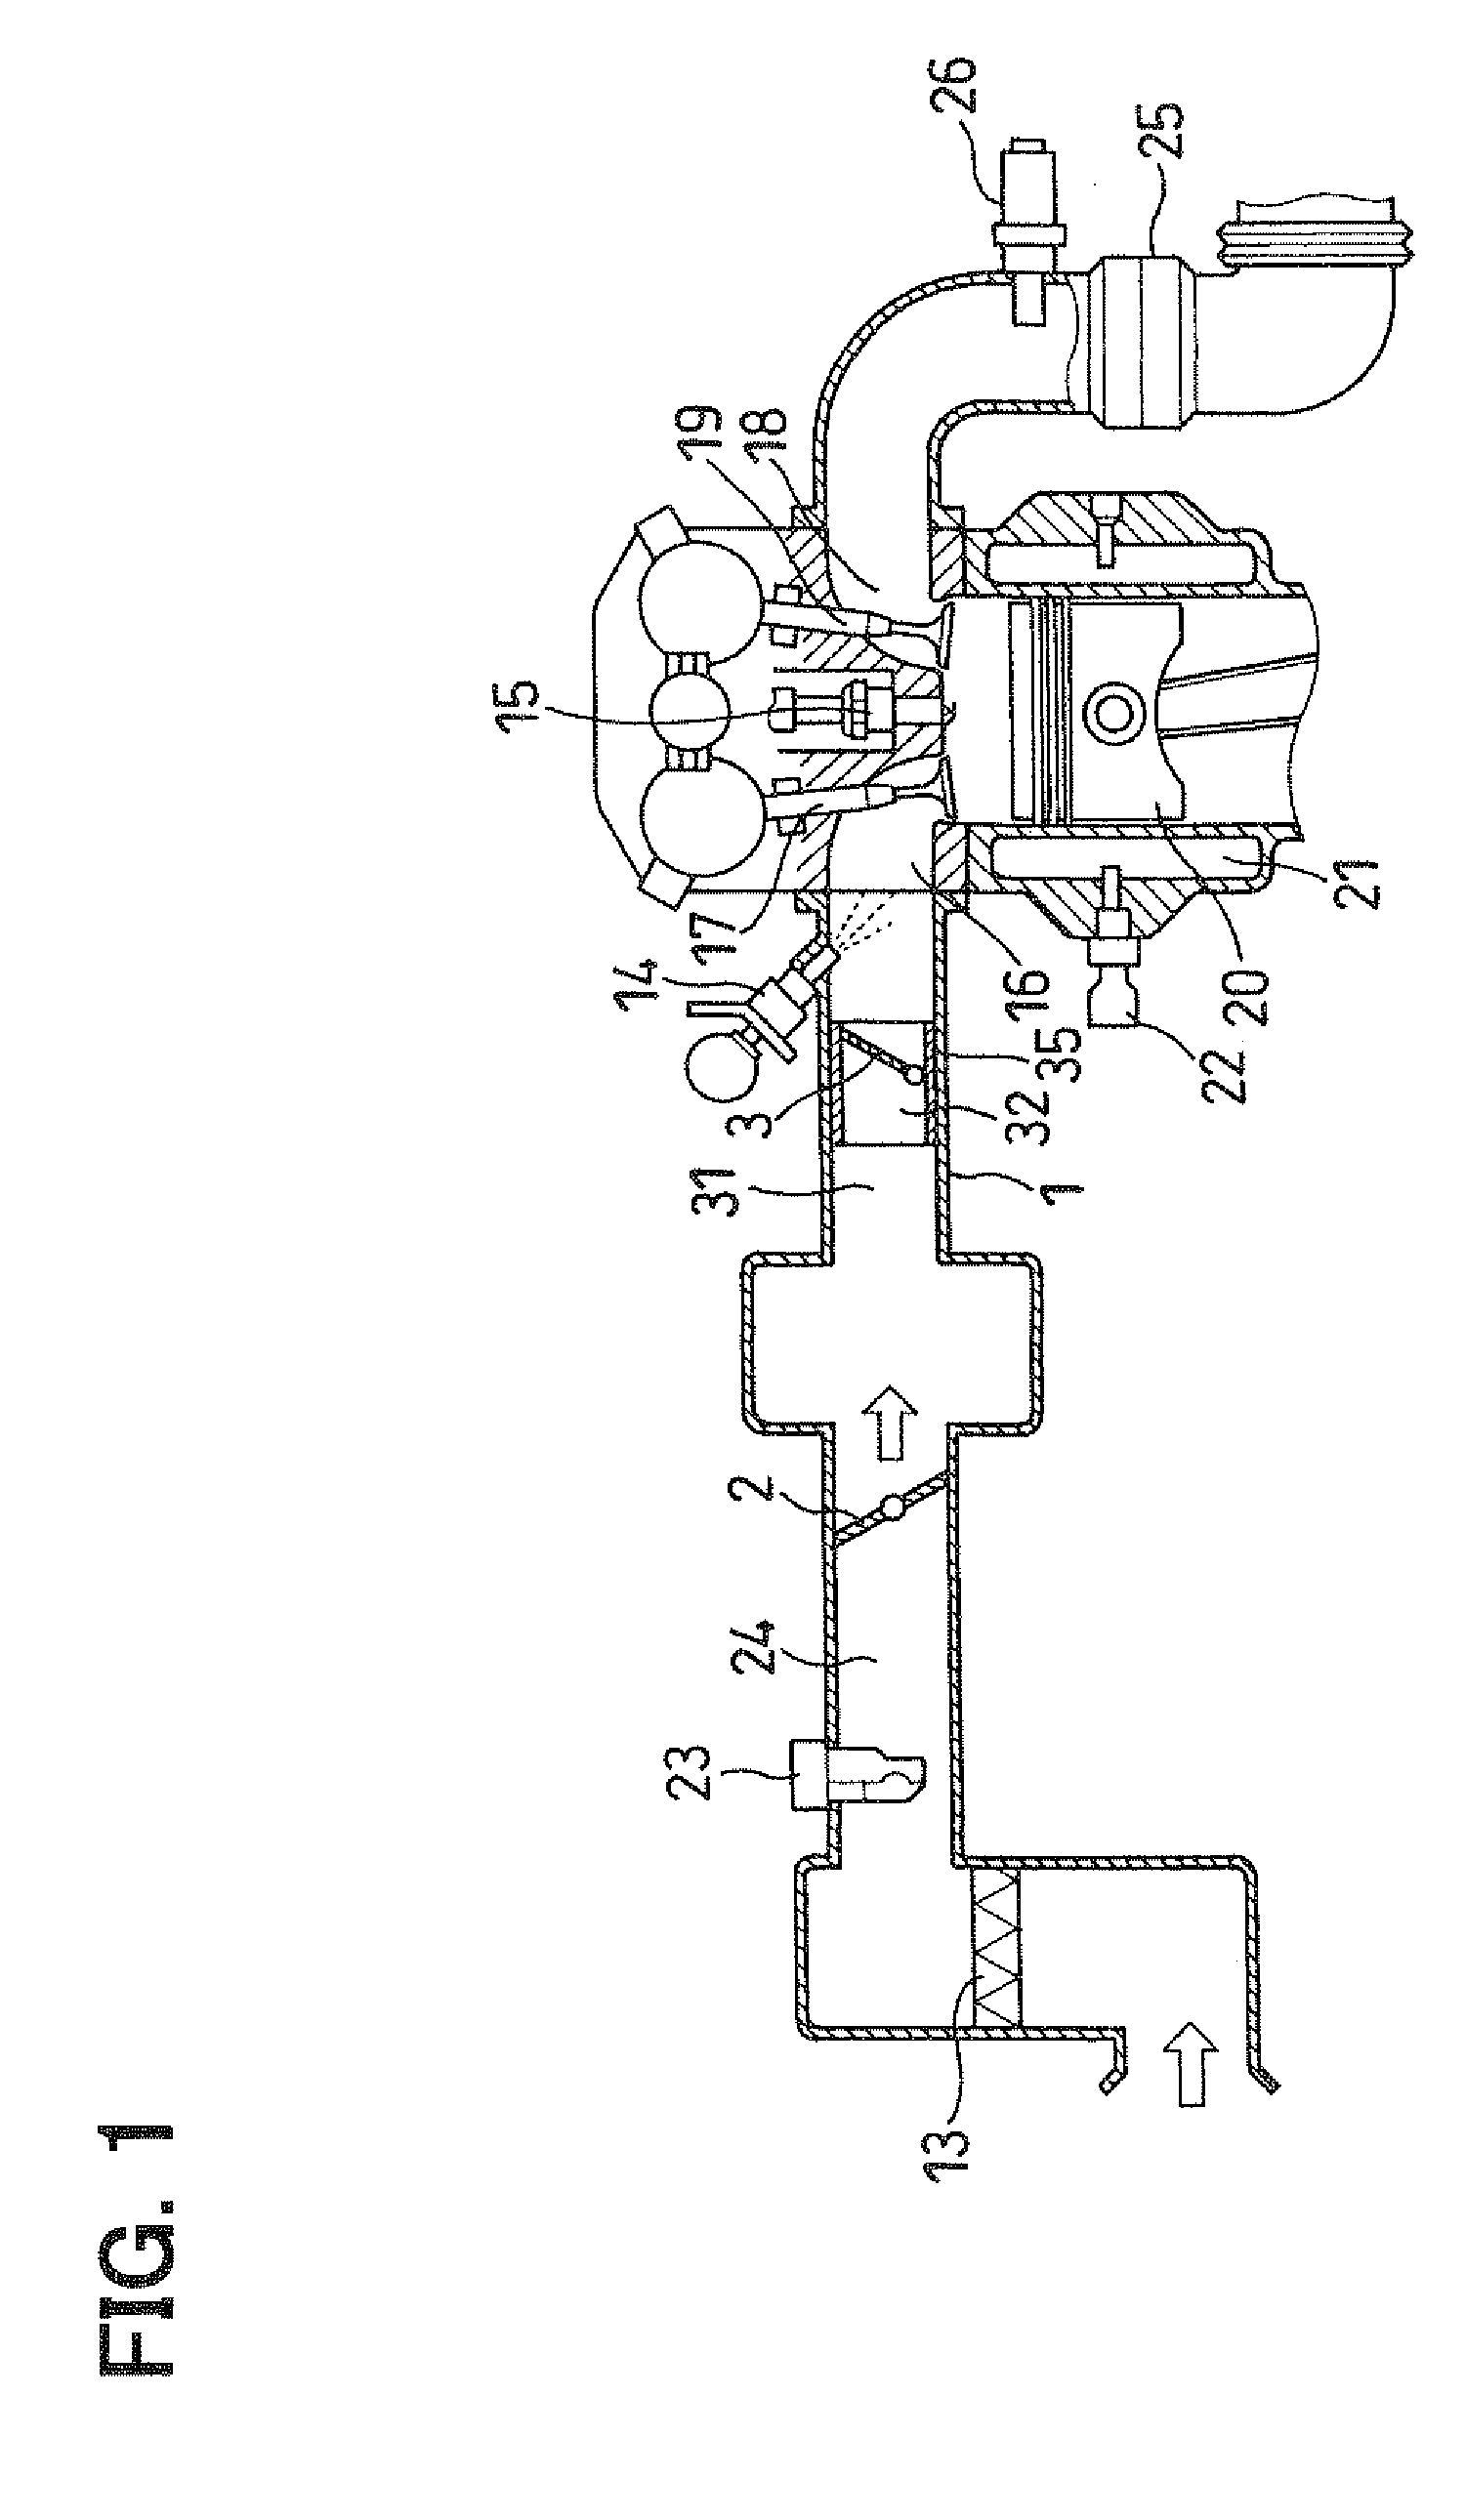 Intake controller for internal combustion engine